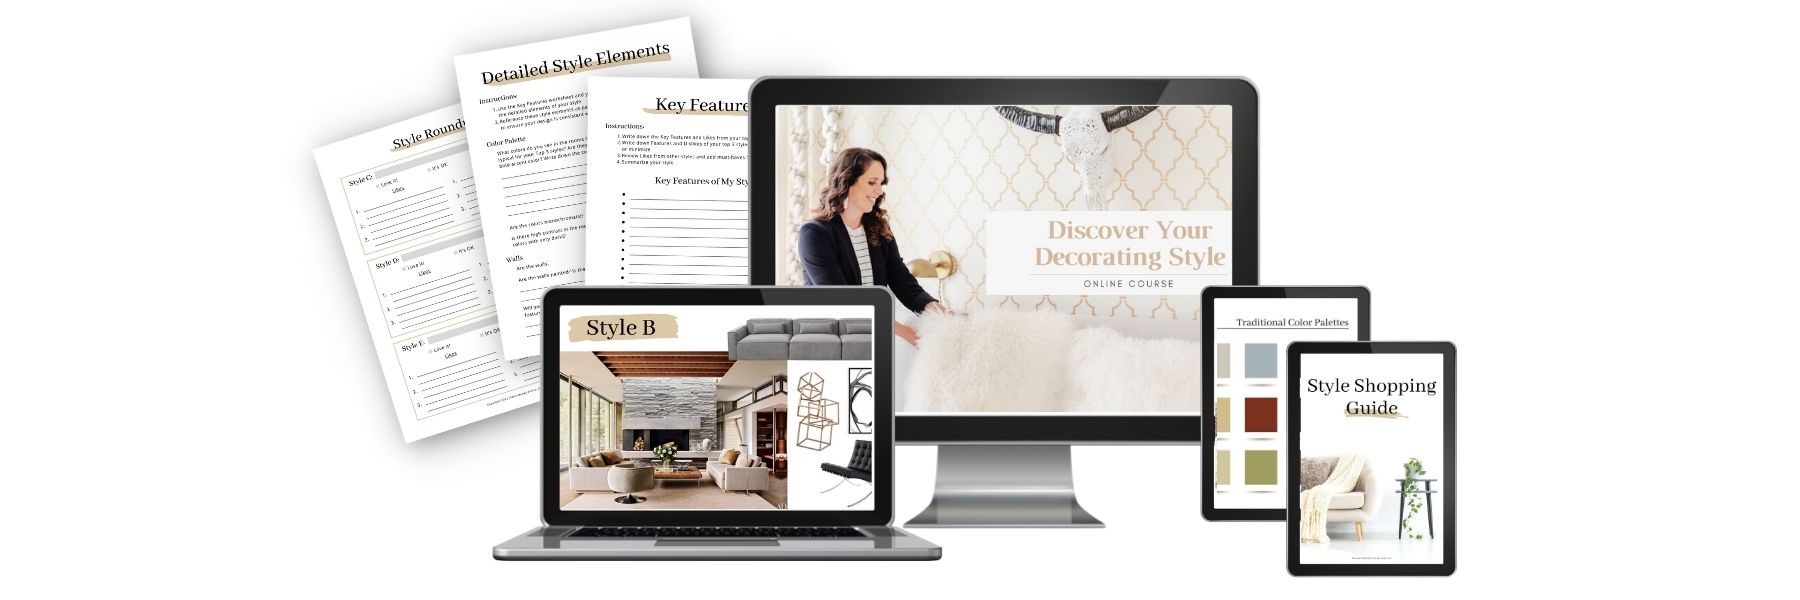 decorating style online course